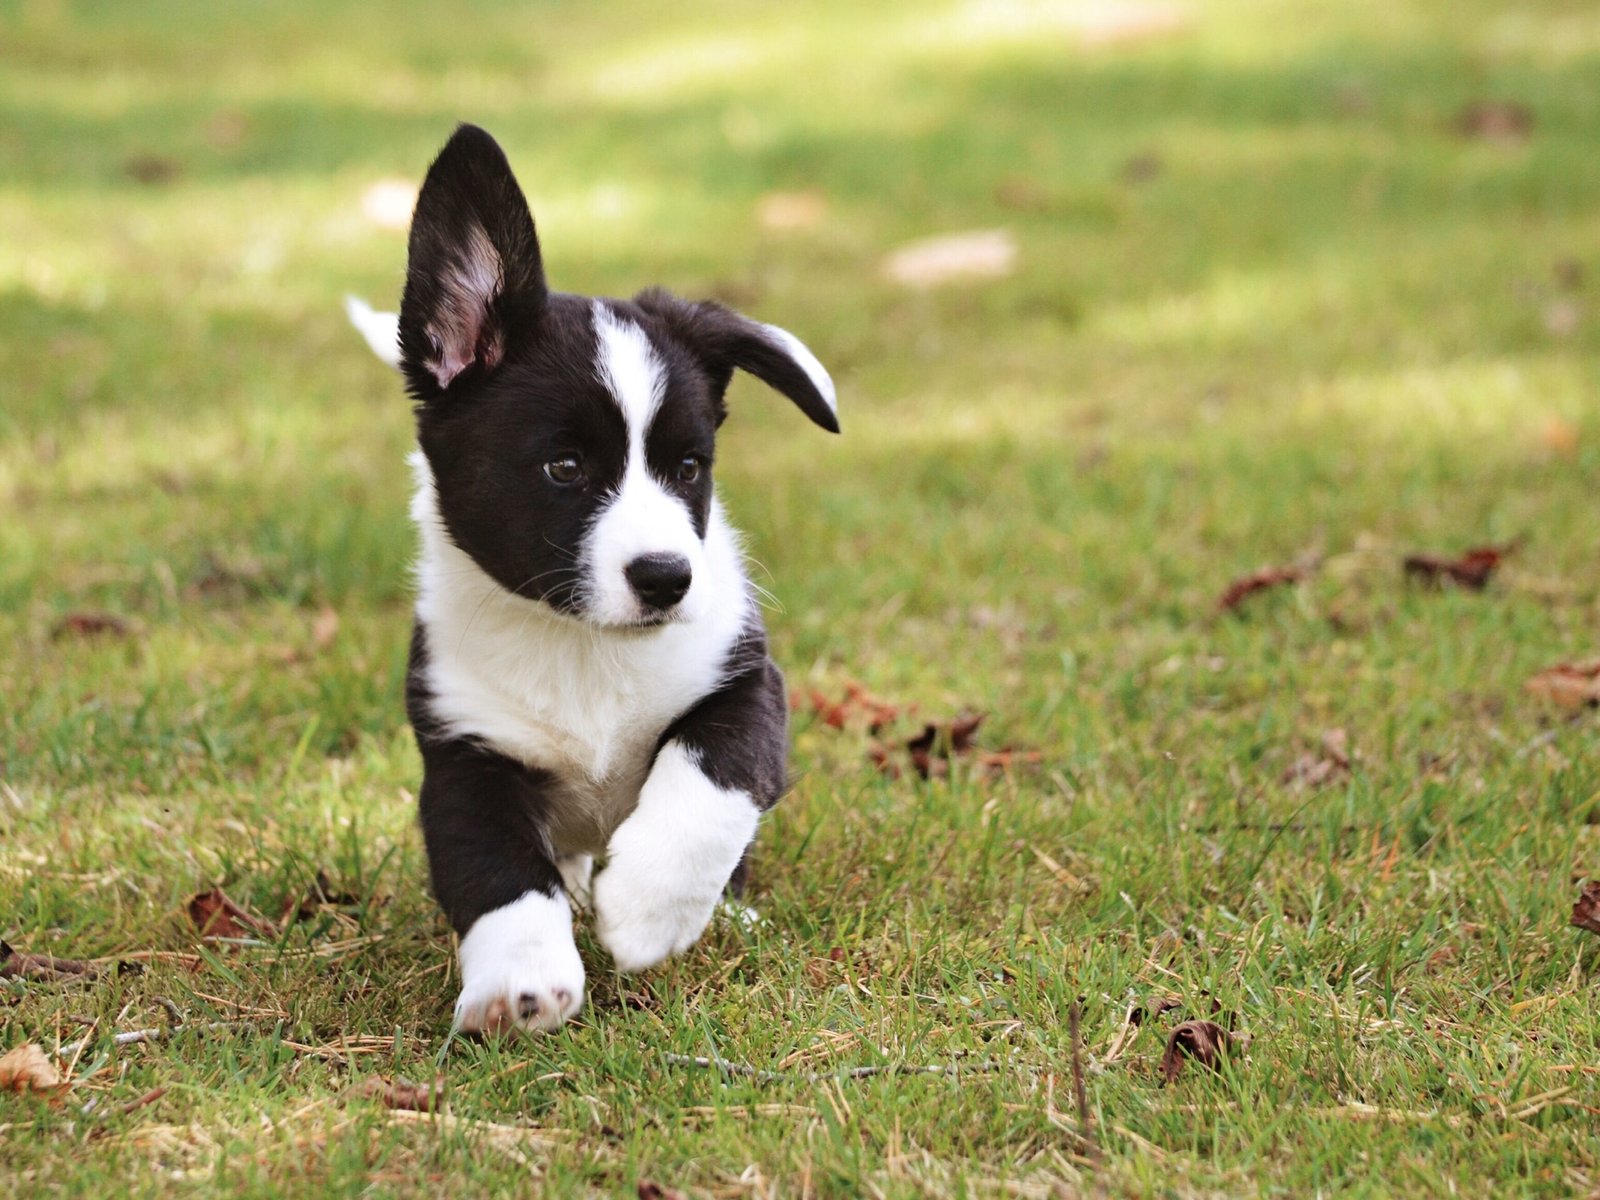 Rookies Puppy class - 11 weeks - 5.5 Months Saturday 3:30pm Burleigh 